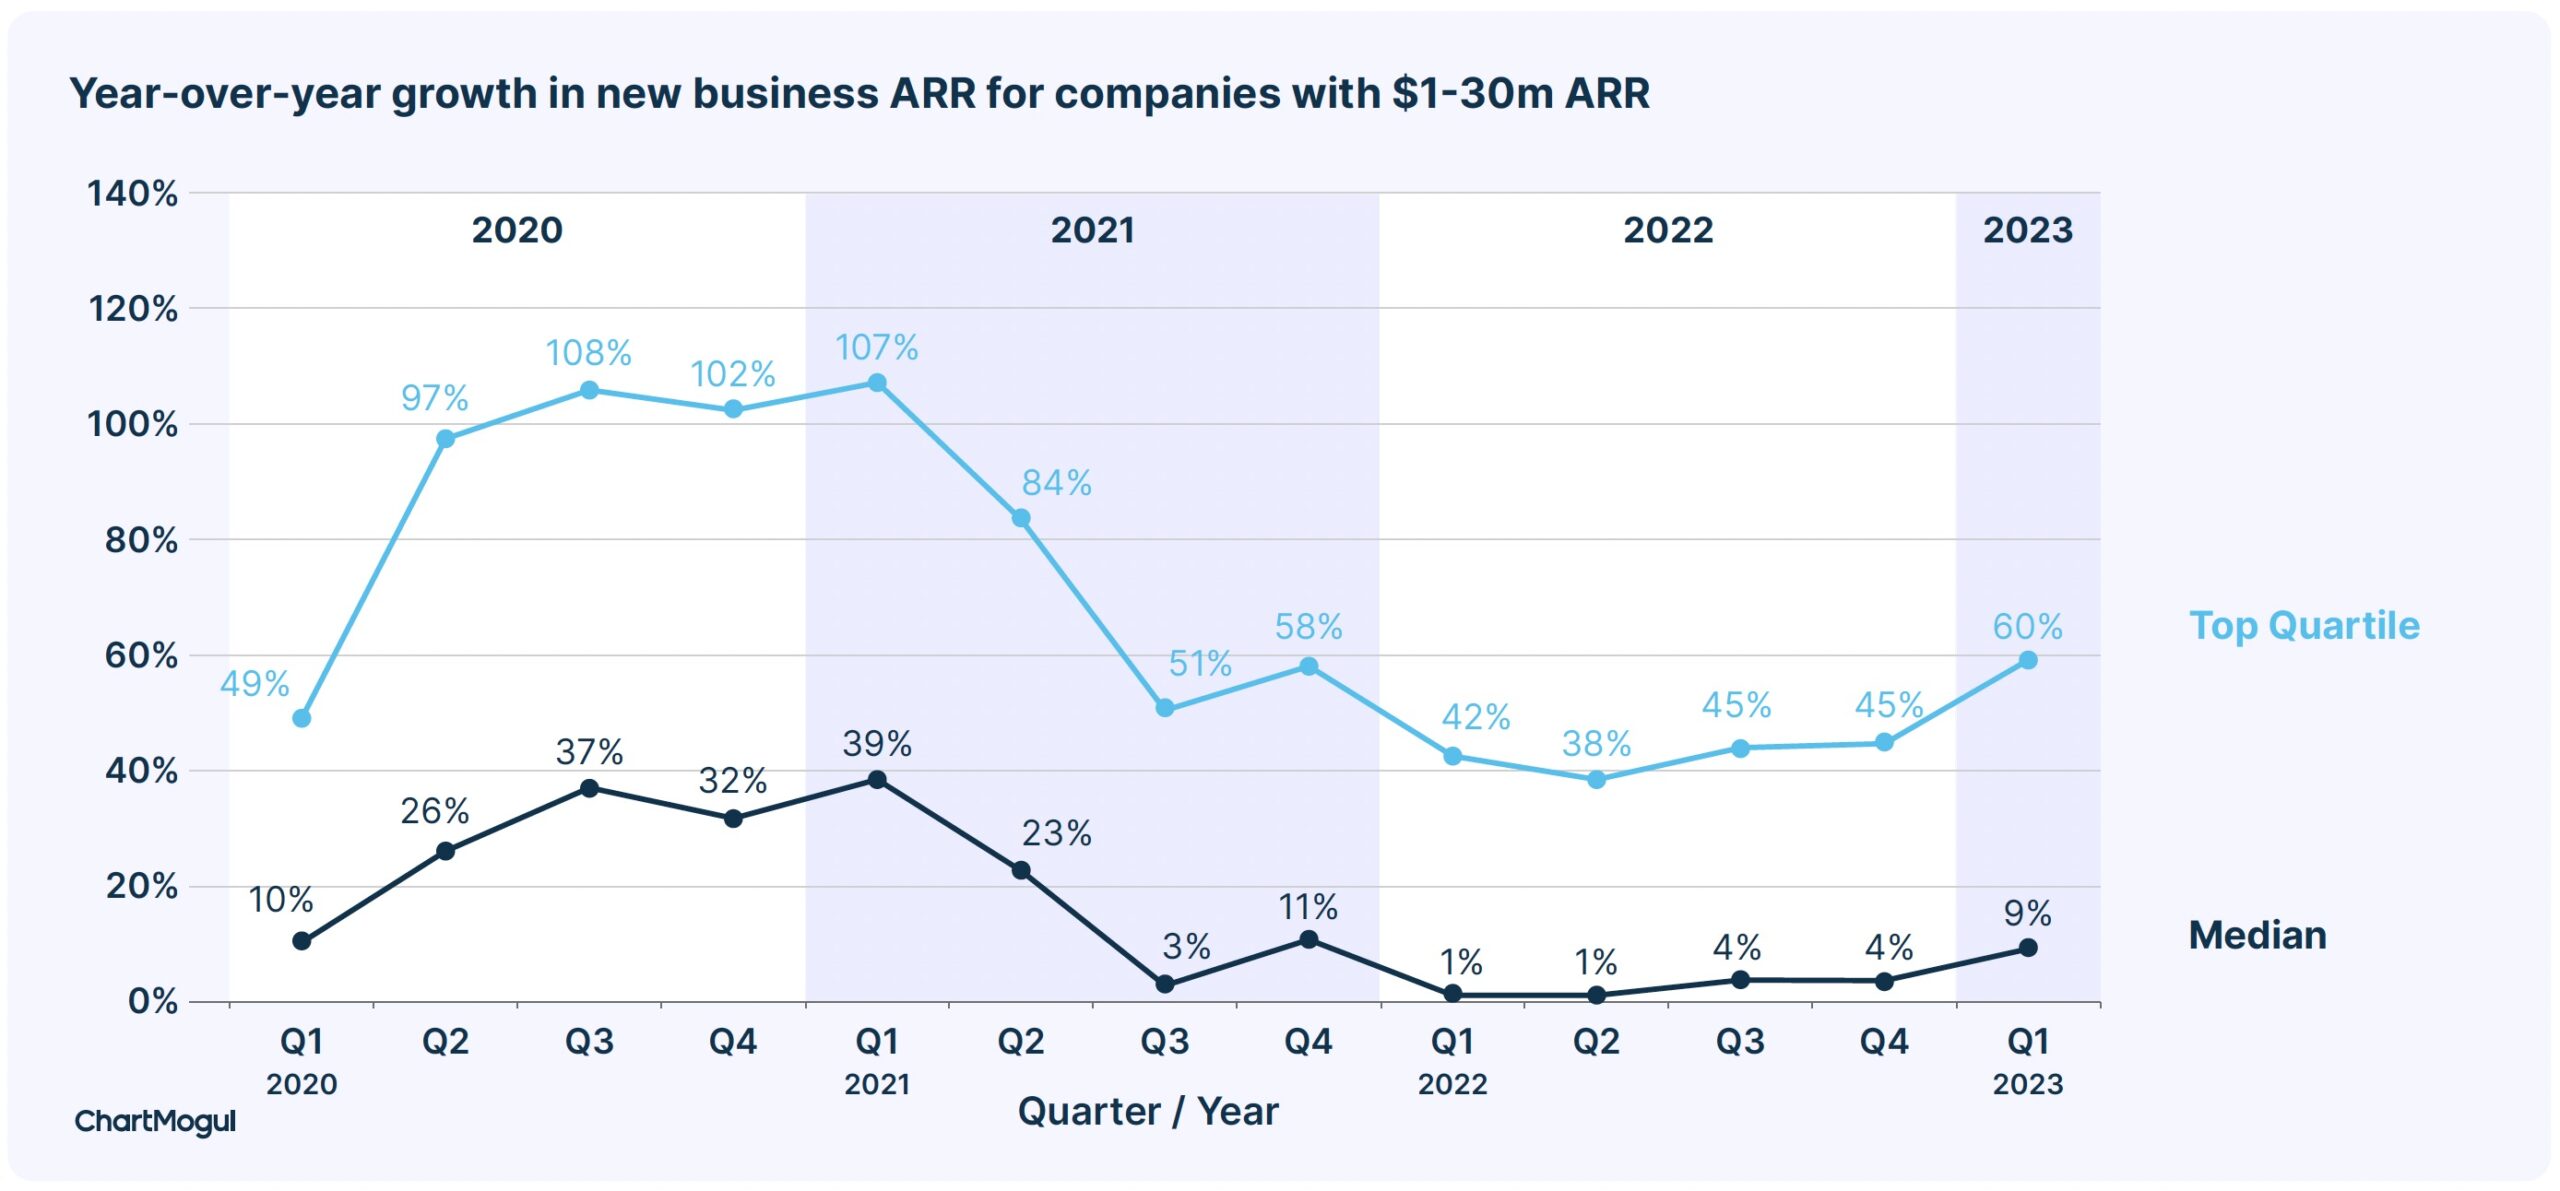 New Business ARR is accelerating in 2023